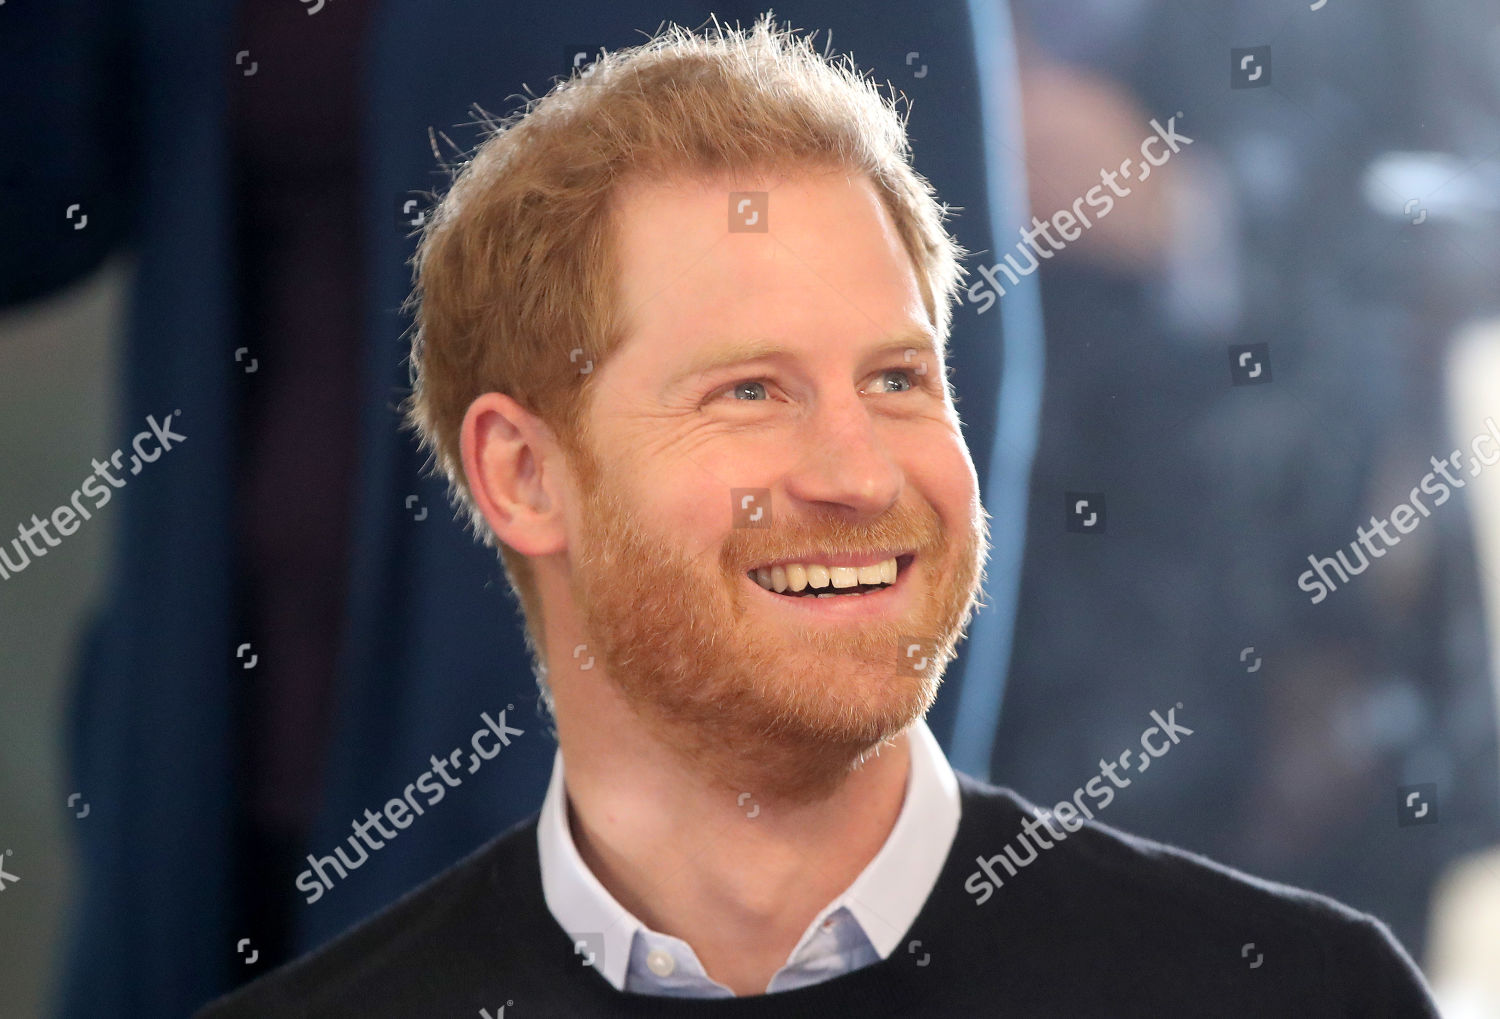 prince-harry-visit-to-fit-and-fed-half-term-initiative-streatham-london-uk-shutterstock-editorial-10110713i.jpg